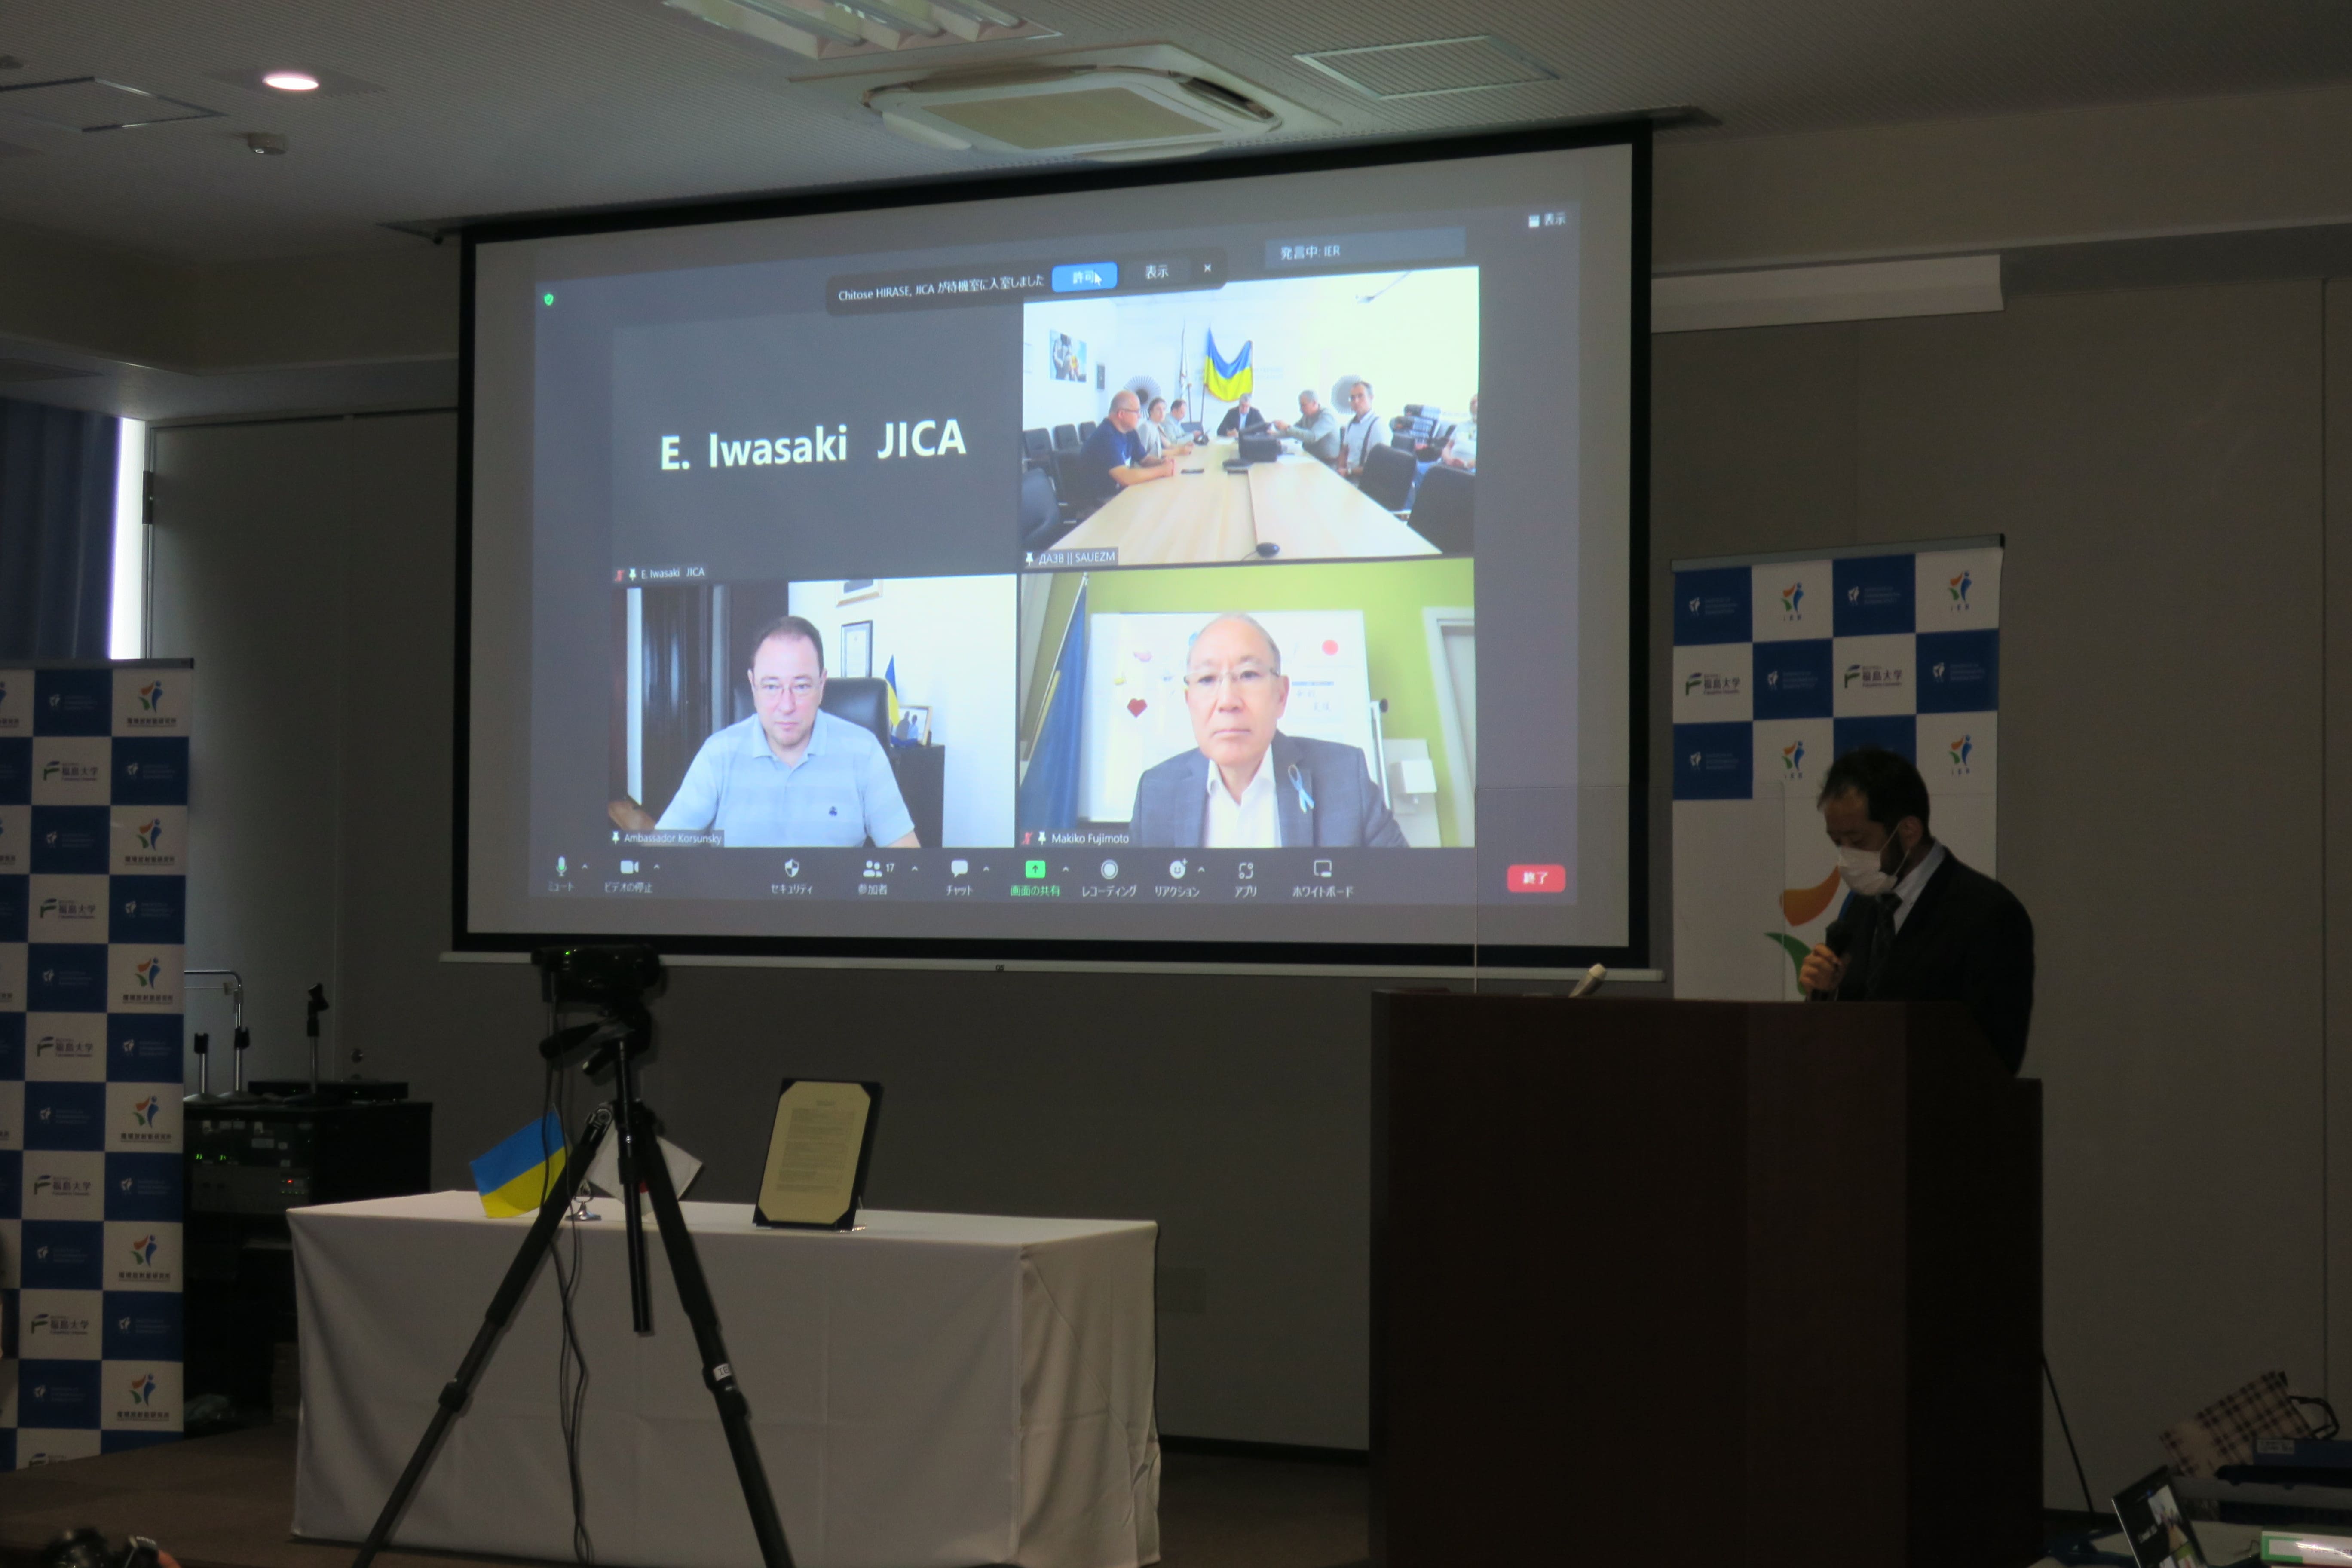 The handover ceremony was held online. Top right: SAUEZM and Ecocentre staff, bottom left: Ambassador Korsunsky, bottom right: Ambassador Matsuda on the screen